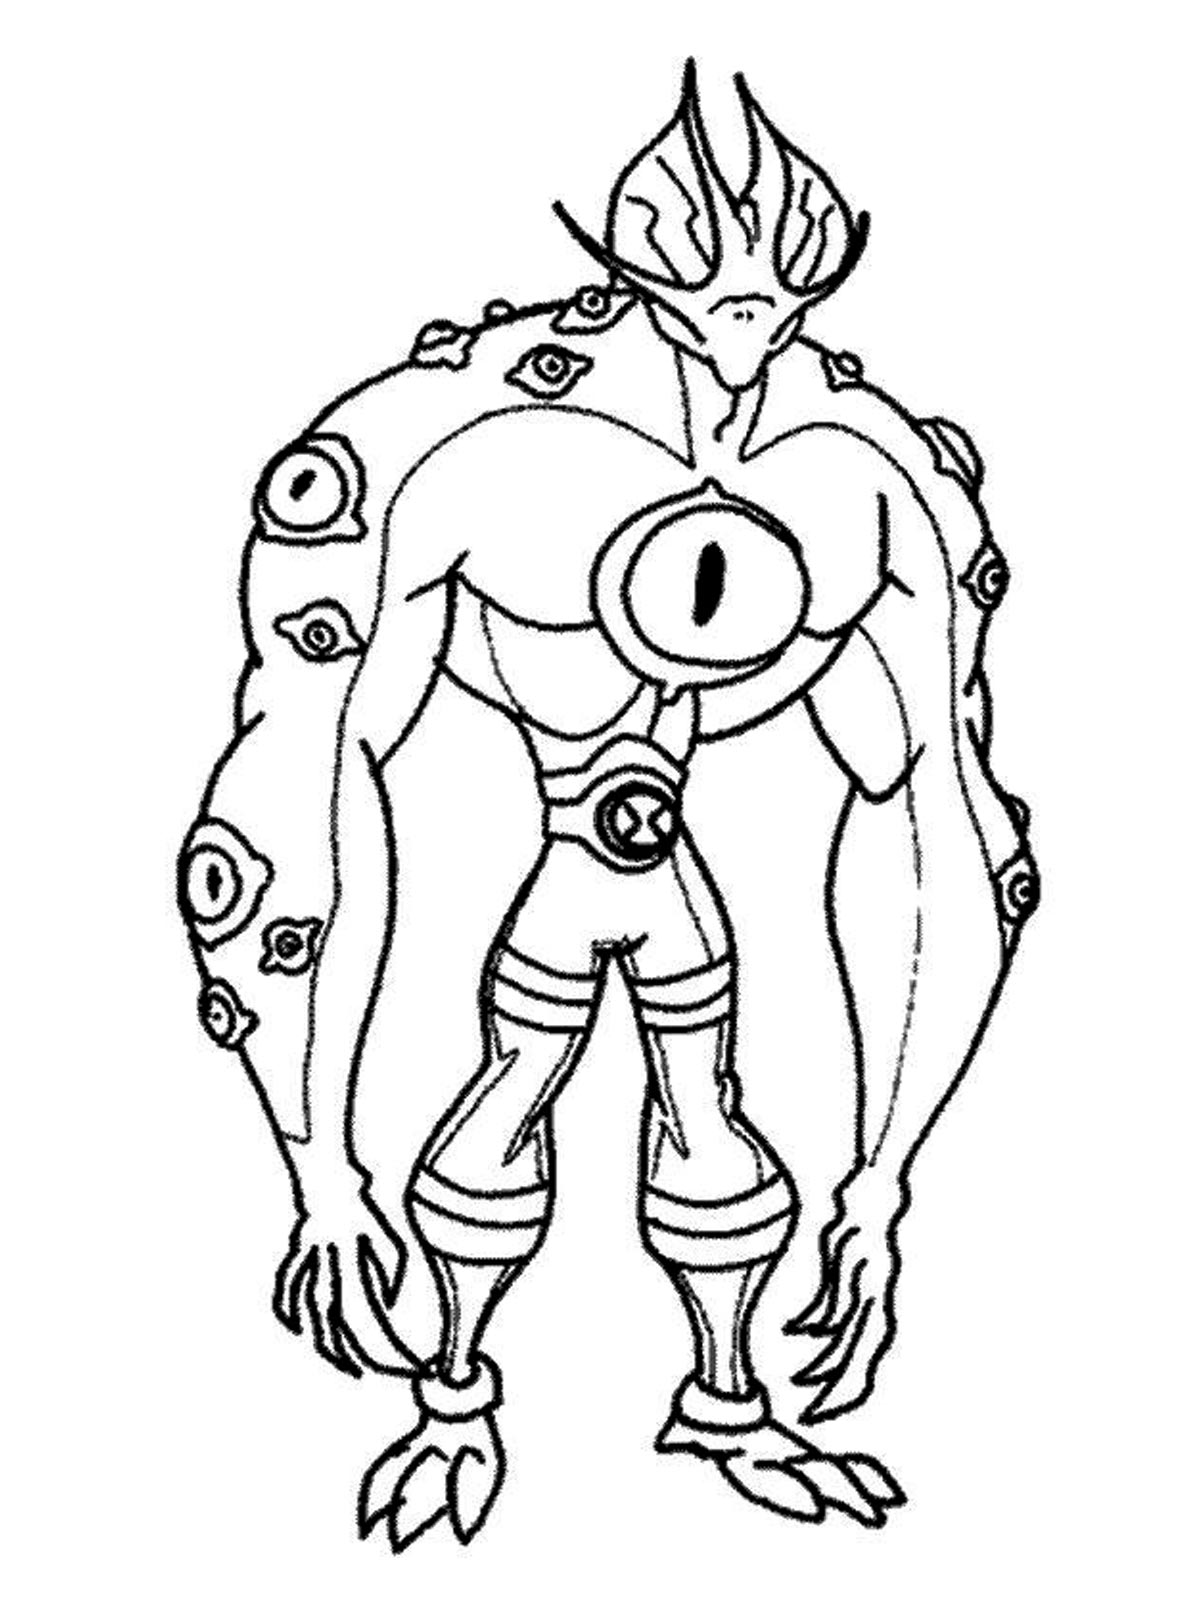 Ben 10 Ultimate Alien Coloring Pages Games - High Quality Coloring ...